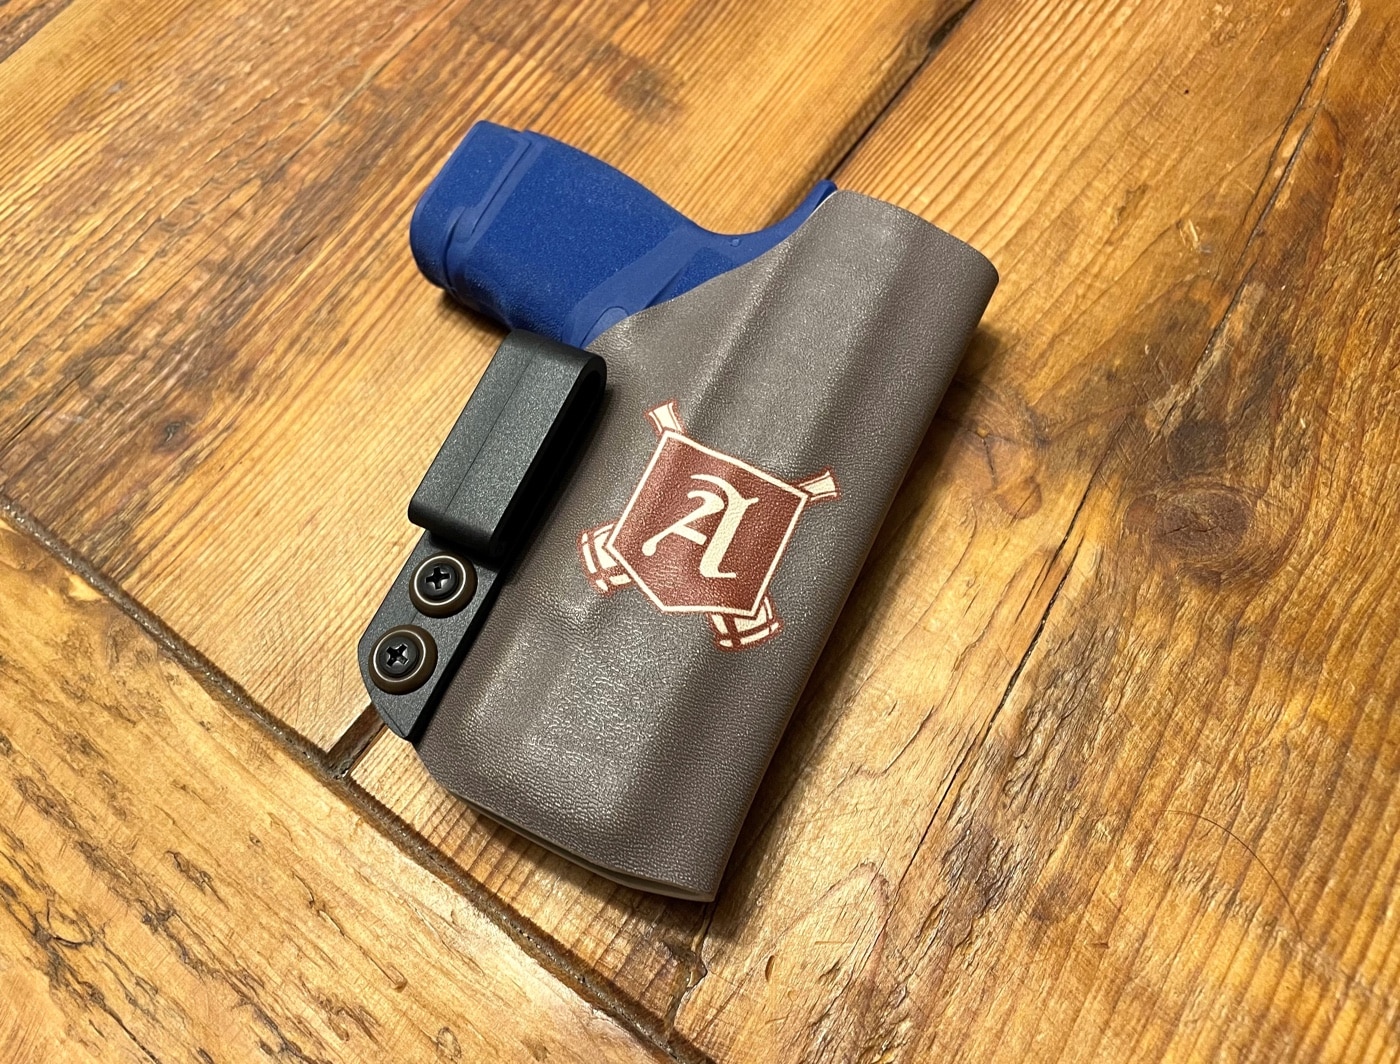 In this photo, we see the author's completed holster. It is an appendix inside-the-waistband rig that he made specifically for his Hellcat. The rig has several things that make it unique including the incorporation of The Armory Life logo. It beats having to buy a holster that would cost extra for the customization. Follow this tutorial and you can do the same for your Springfield, Glock or M&P. It can be made for pistols with and without an accessory rail.